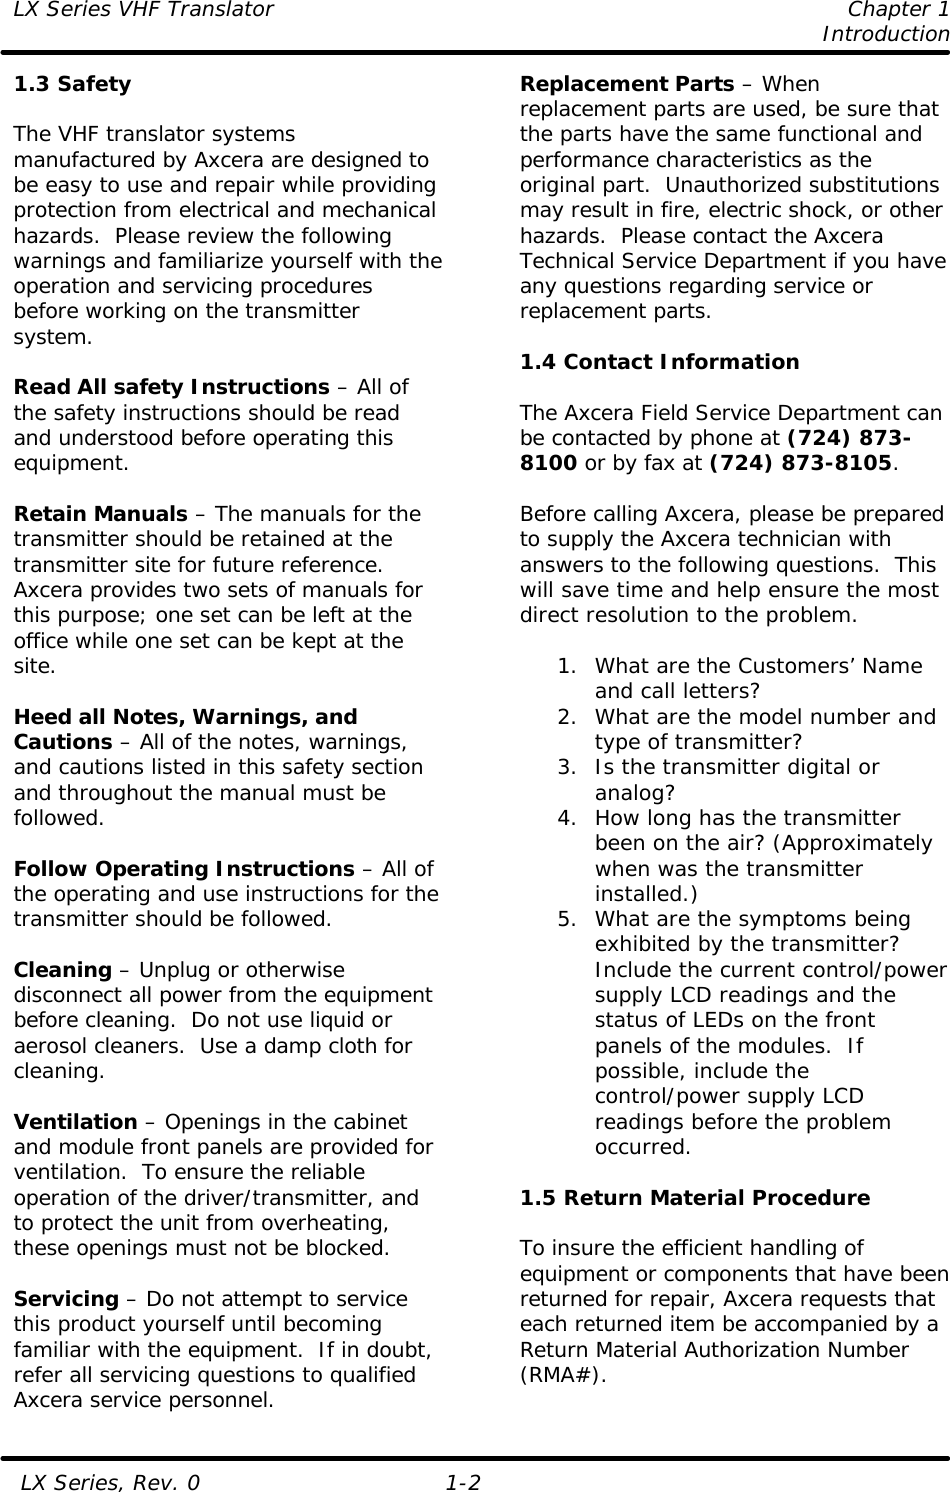 LX Series VHF Translator    Chapter 1     Introduction   LX Series, Rev. 0 1-2 1.3 Safety  The VHF translator systems manufactured by Axcera are designed to be easy to use and repair while providing protection from electrical and mechanical hazards.  Please review the following warnings and familiarize yourself with the operation and servicing procedures before working on the transmitter system.  Read All safety Instructions – All of the safety instructions should be read and understood before operating this equipment.  Retain Manuals – The manuals for the transmitter should be retained at the transmitter site for future reference.  Axcera provides two sets of manuals for this purpose; one set can be left at the office while one set can be kept at the site.  Heed all Notes, Warnings, and Cautions – All of the notes, warnings, and cautions listed in this safety section and throughout the manual must be followed.  Follow Operating Instructions – All of the operating and use instructions for the transmitter should be followed.  Cleaning – Unplug or otherwise disconnect all power from the equipment before cleaning.  Do not use liquid or aerosol cleaners.  Use a damp cloth for cleaning.  Ventilation – Openings in the cabinet and module front panels are provided for ventilation.  To ensure the reliable operation of the driver/transmitter, and to protect the unit from overheating, these openings must not be blocked.  Servicing – Do not attempt to service this product yourself until becoming familiar with the equipment.  If in doubt, refer all servicing questions to qualified Axcera service personnel. Replacement Parts – When replacement parts are used, be sure that the parts have the same functional and performance characteristics as the original part.  Unauthorized substitutions may result in fire, electric shock, or other hazards.  Please contact the Axcera Technical Service Department if you have any questions regarding service or replacement parts.  1.4 Contact Information  The Axcera Field Service Department can be contacted by phone at (724) 873-8100 or by fax at (724) 873-8105.    Before calling Axcera, please be prepared to supply the Axcera technician with answers to the following questions.  This will save time and help ensure the most direct resolution to the problem.  1. What are the Customers’ Name and call letters? 2. What are the model number and type of transmitter? 3. Is the transmitter digital or analog? 4. How long has the transmitter been on the air? (Approximately when was the transmitter installed.) 5. What are the symptoms being exhibited by the transmitter? Include the current control/power supply LCD readings and the status of LEDs on the front panels of the modules.  If possible, include the control/power supply LCD readings before the problem occurred.  1.5 Return Material Procedure  To insure the efficient handling of equipment or components that have been returned for repair, Axcera requests that each returned item be accompanied by a Return Material Authorization Number (RMA#). 